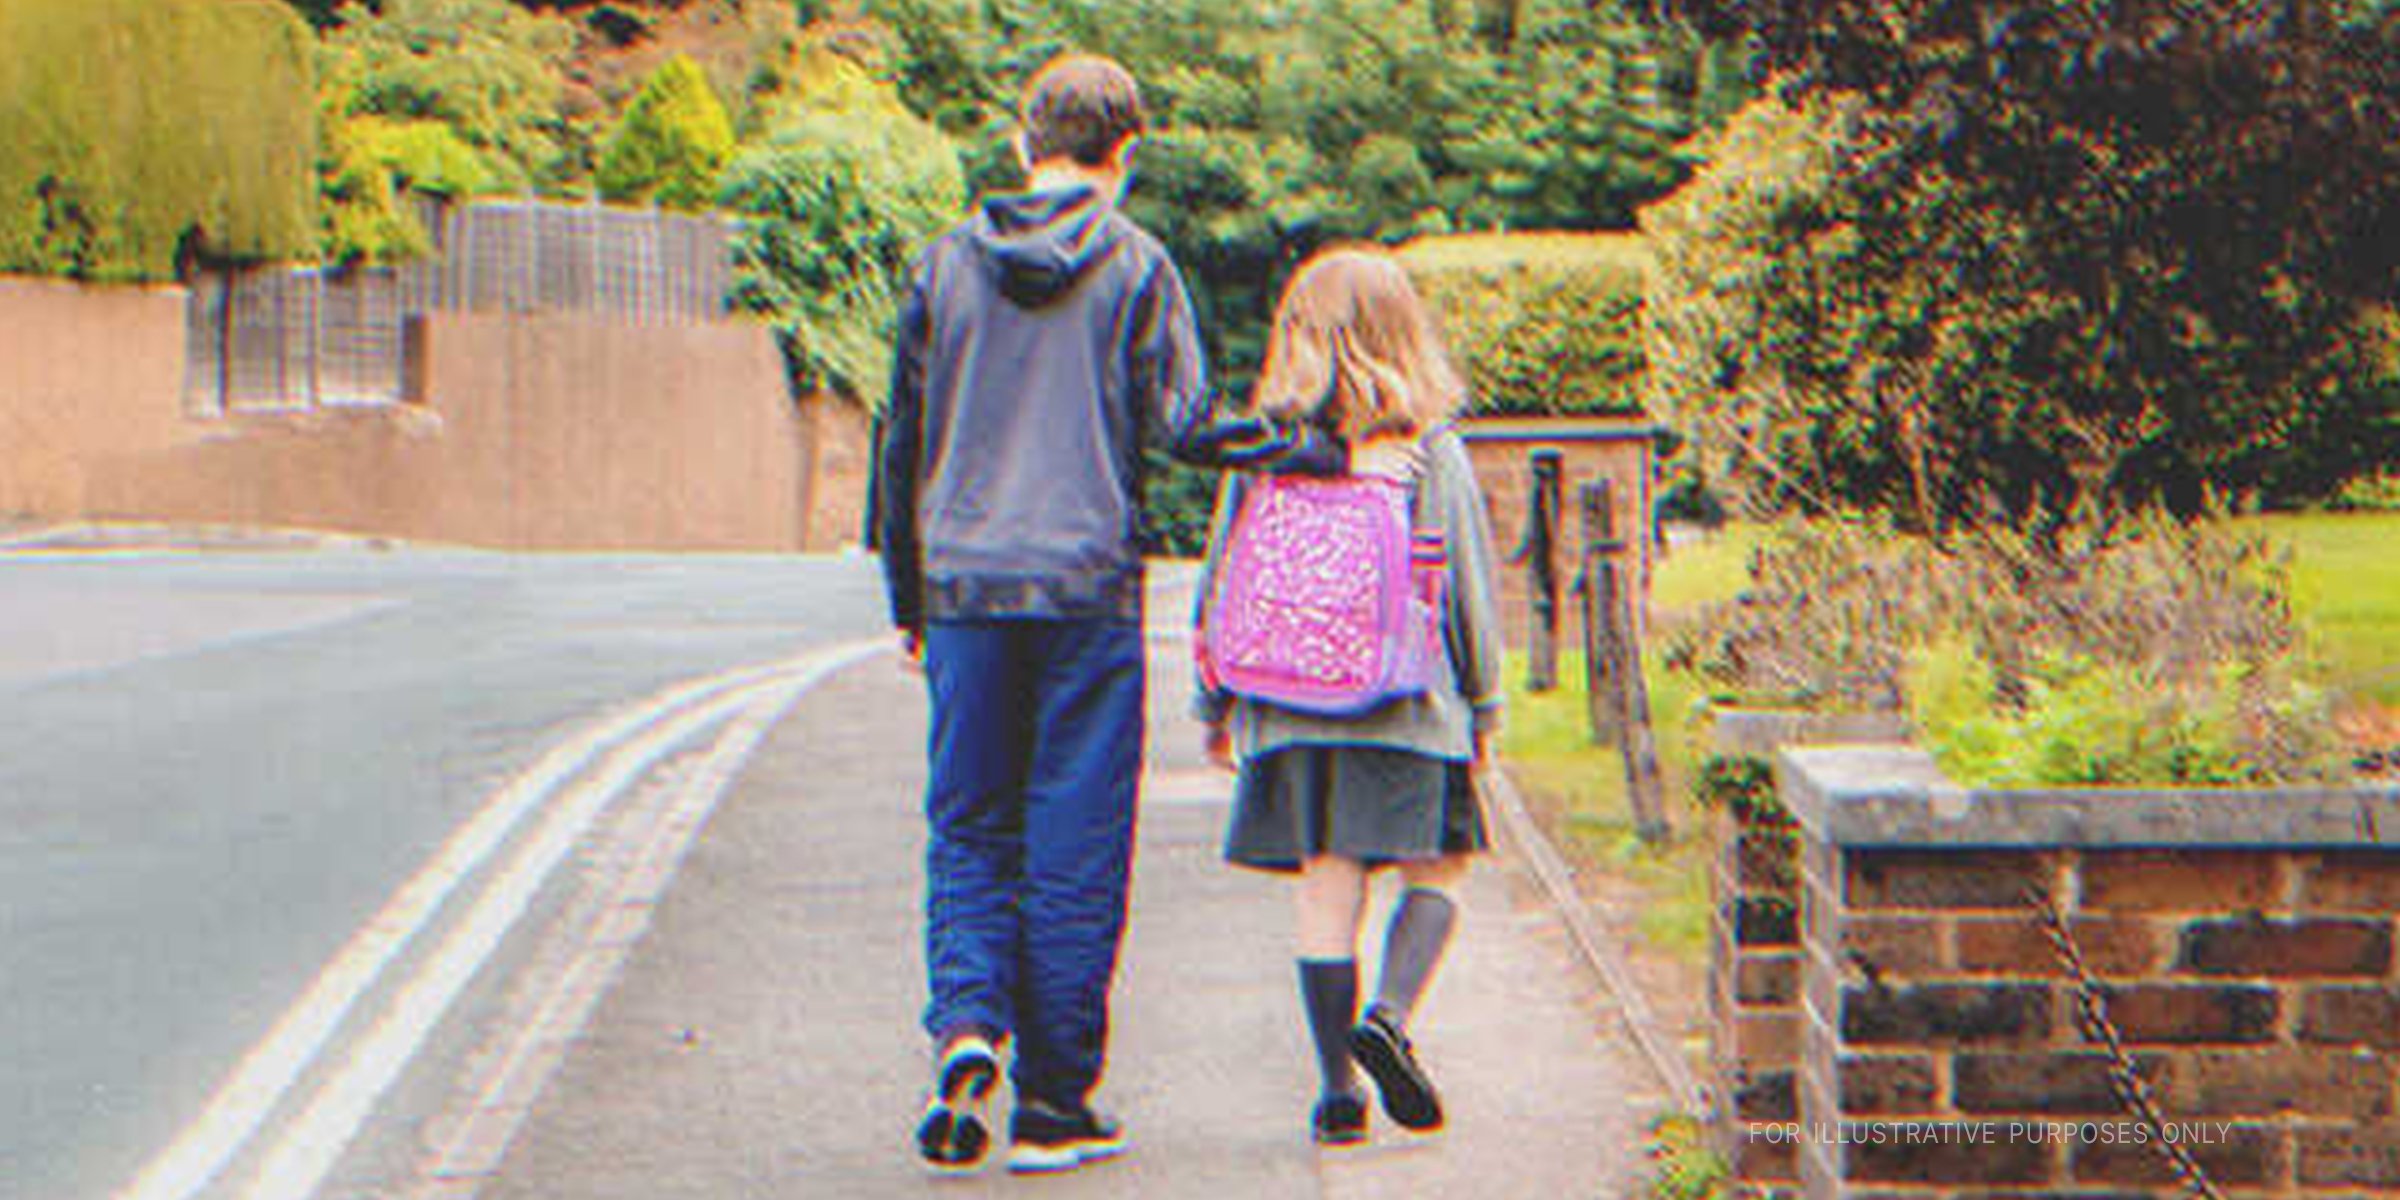 An older boy and young girl walking together | Source: Shutterstock 